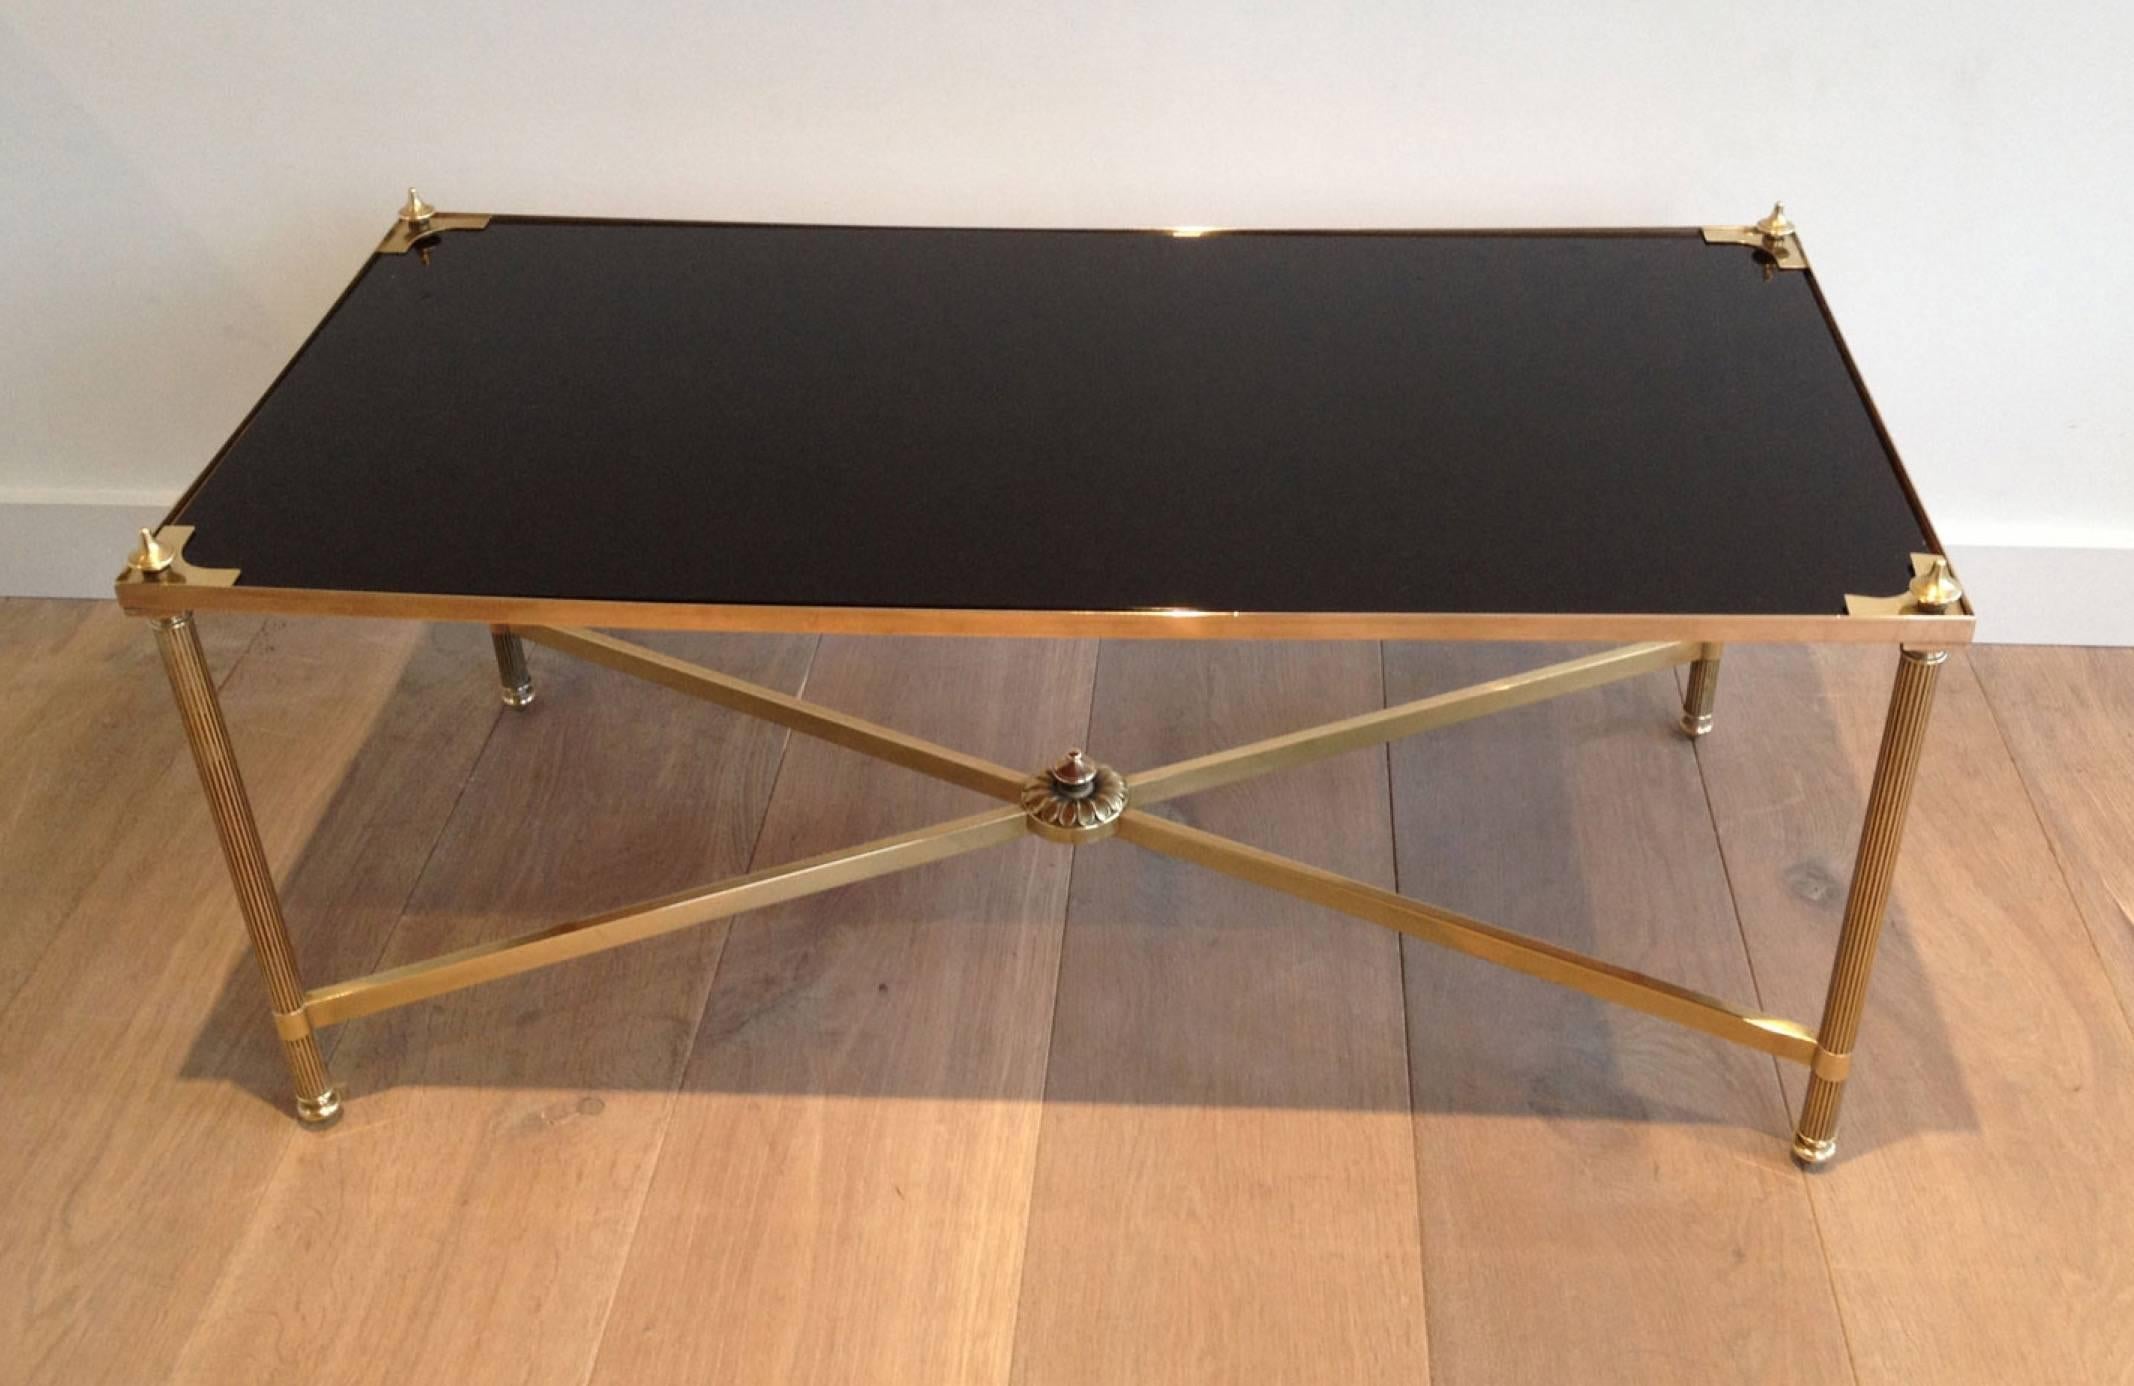 Rectangular brass coffee table with X-stretcher base and black lacquered glass top by Maison Jansen.

This piece is currently in France, please allow 4 to 6 weeks for delivery. Shipping to our warehouse in Long Island City, New York is included in